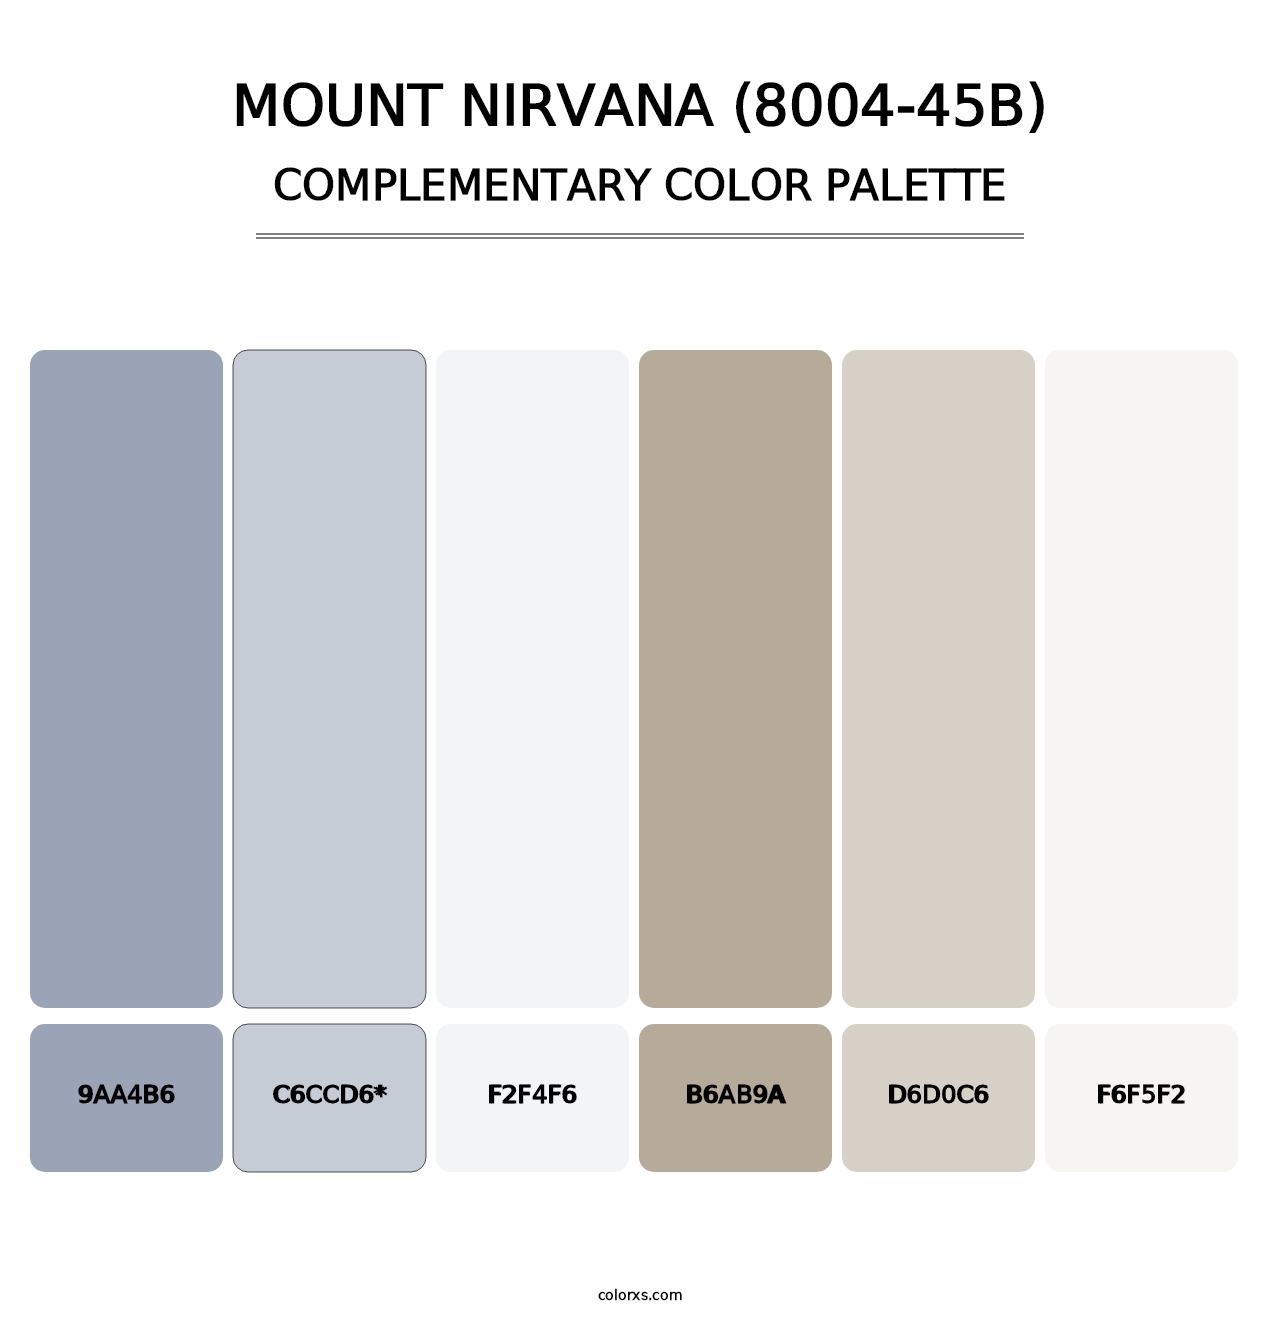 Mount Nirvana (8004-45B) - Complementary Color Palette